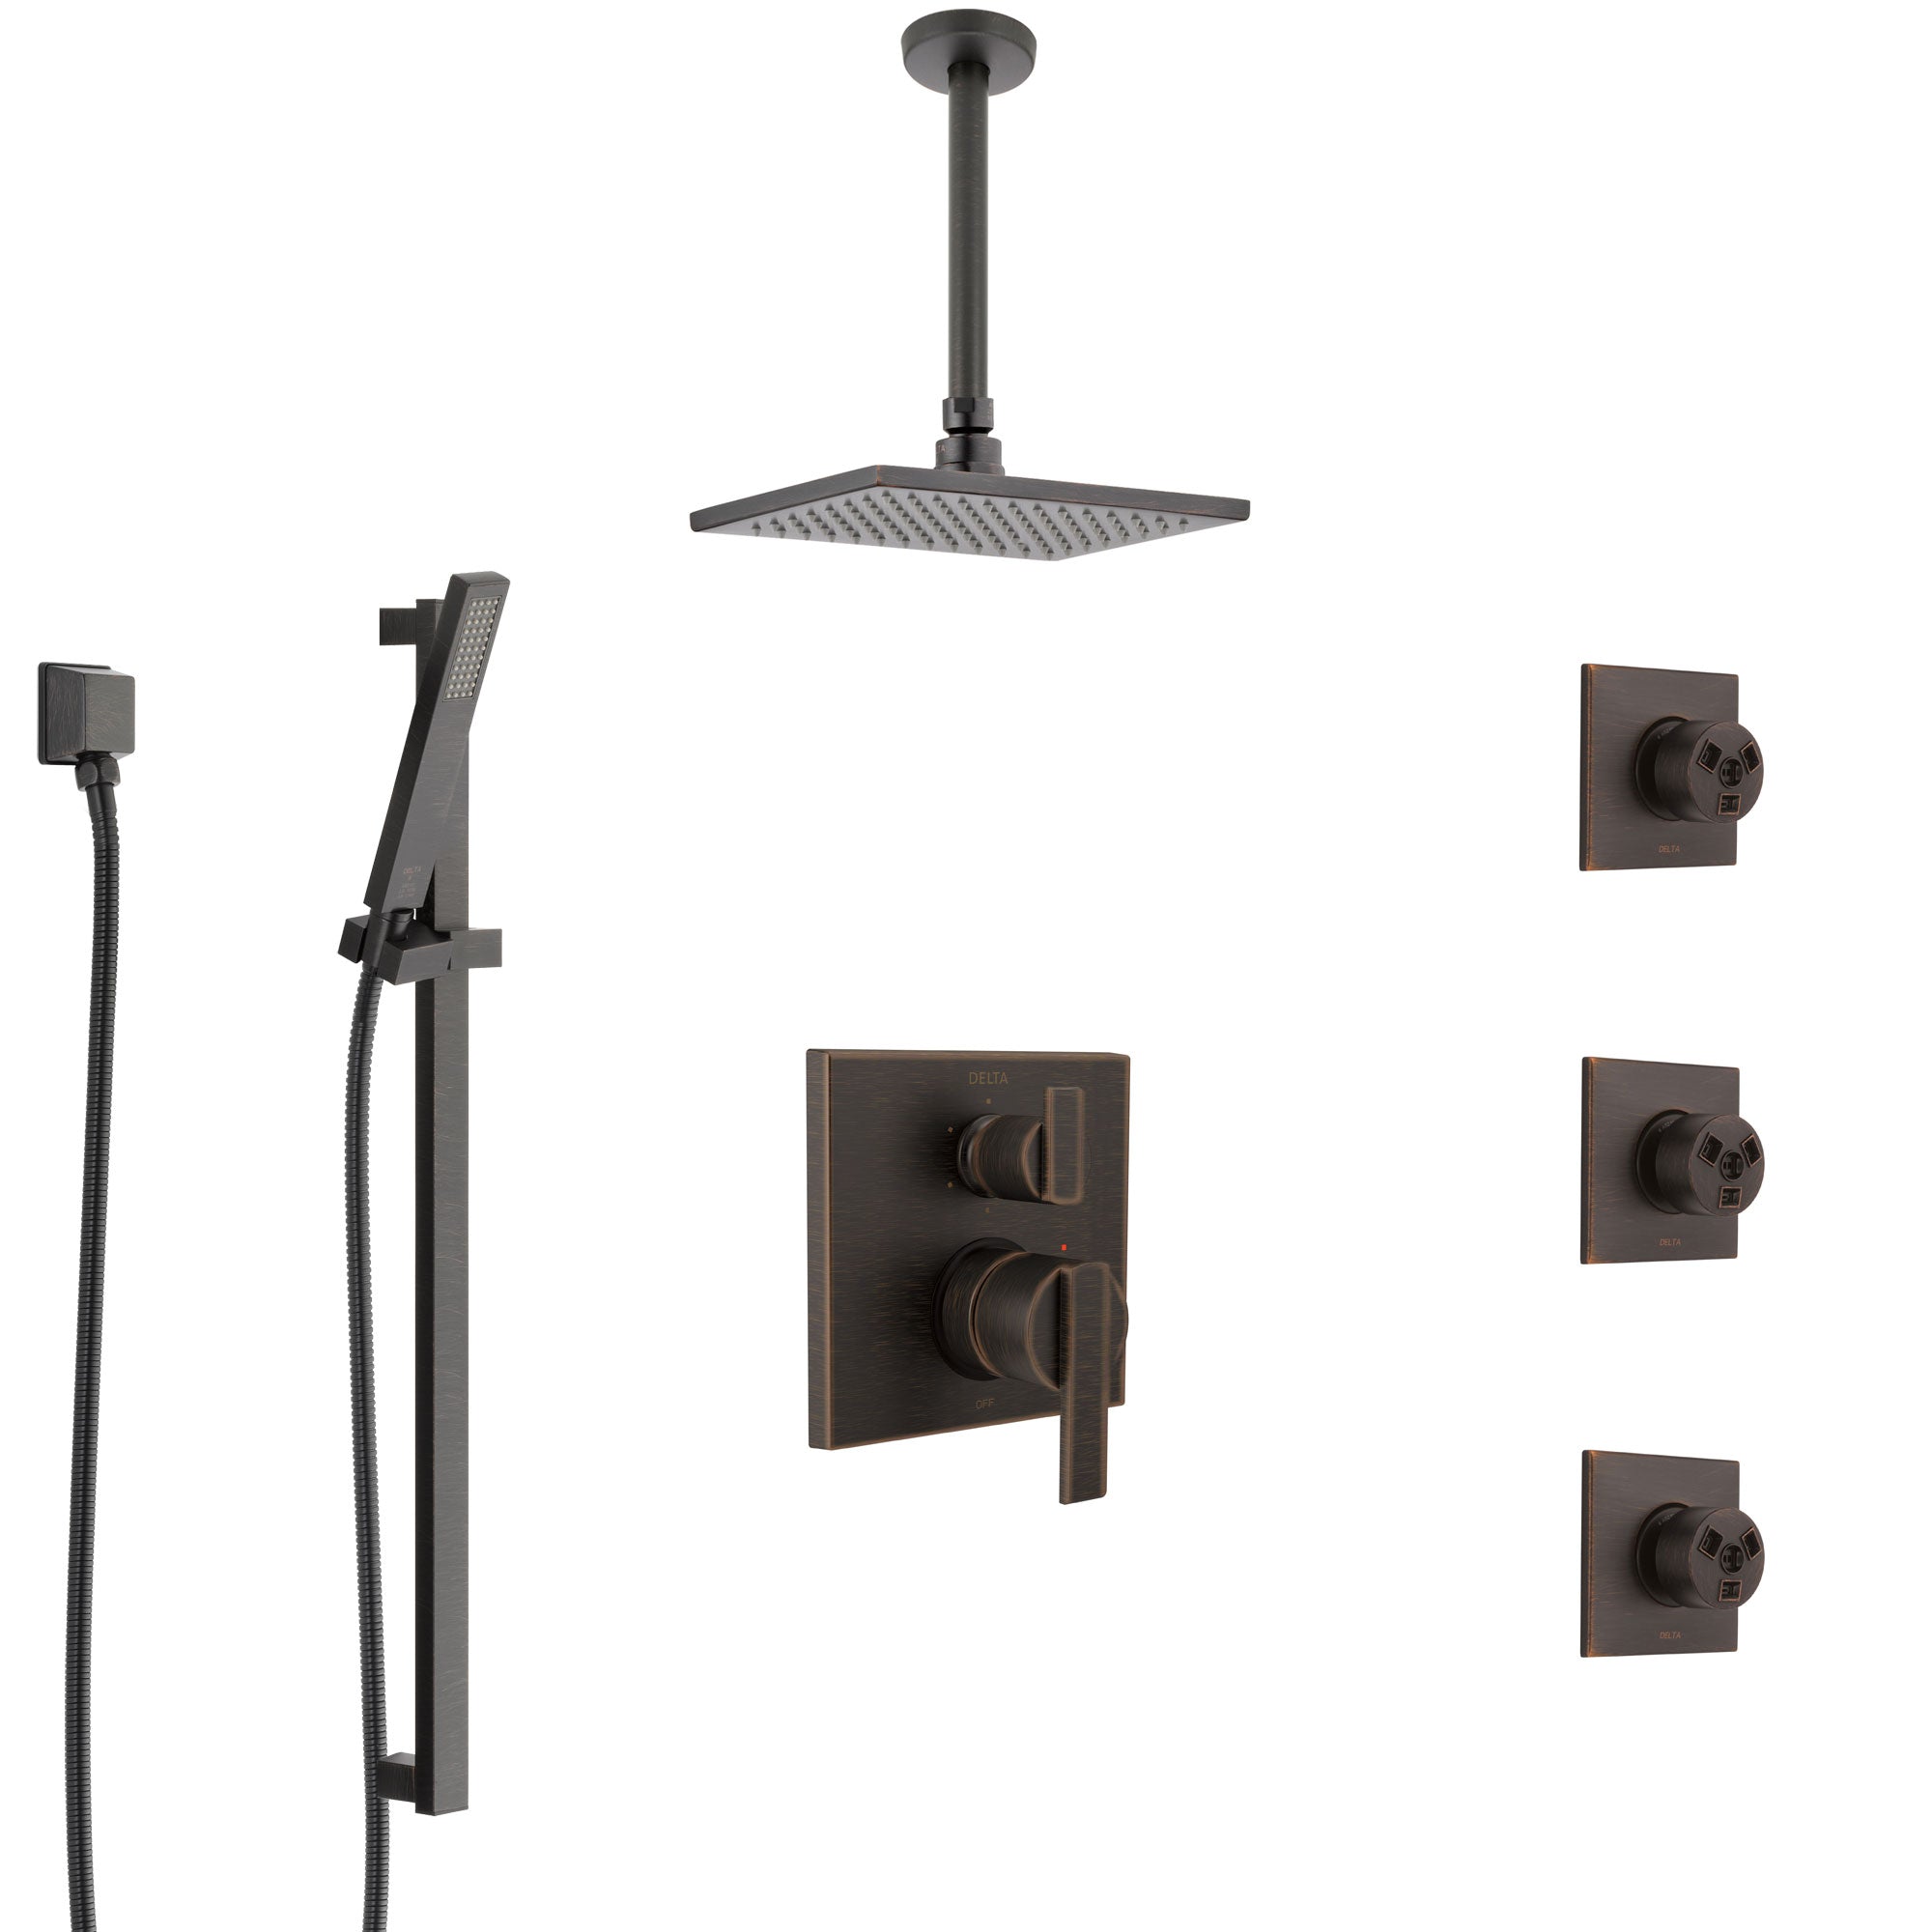 Delta Ara Venetian Bronze Shower System with Control Handle, Integrated Diverter, Ceiling Mount Showerhead, 3 Body Sprays, and Hand Shower SS24967RB3